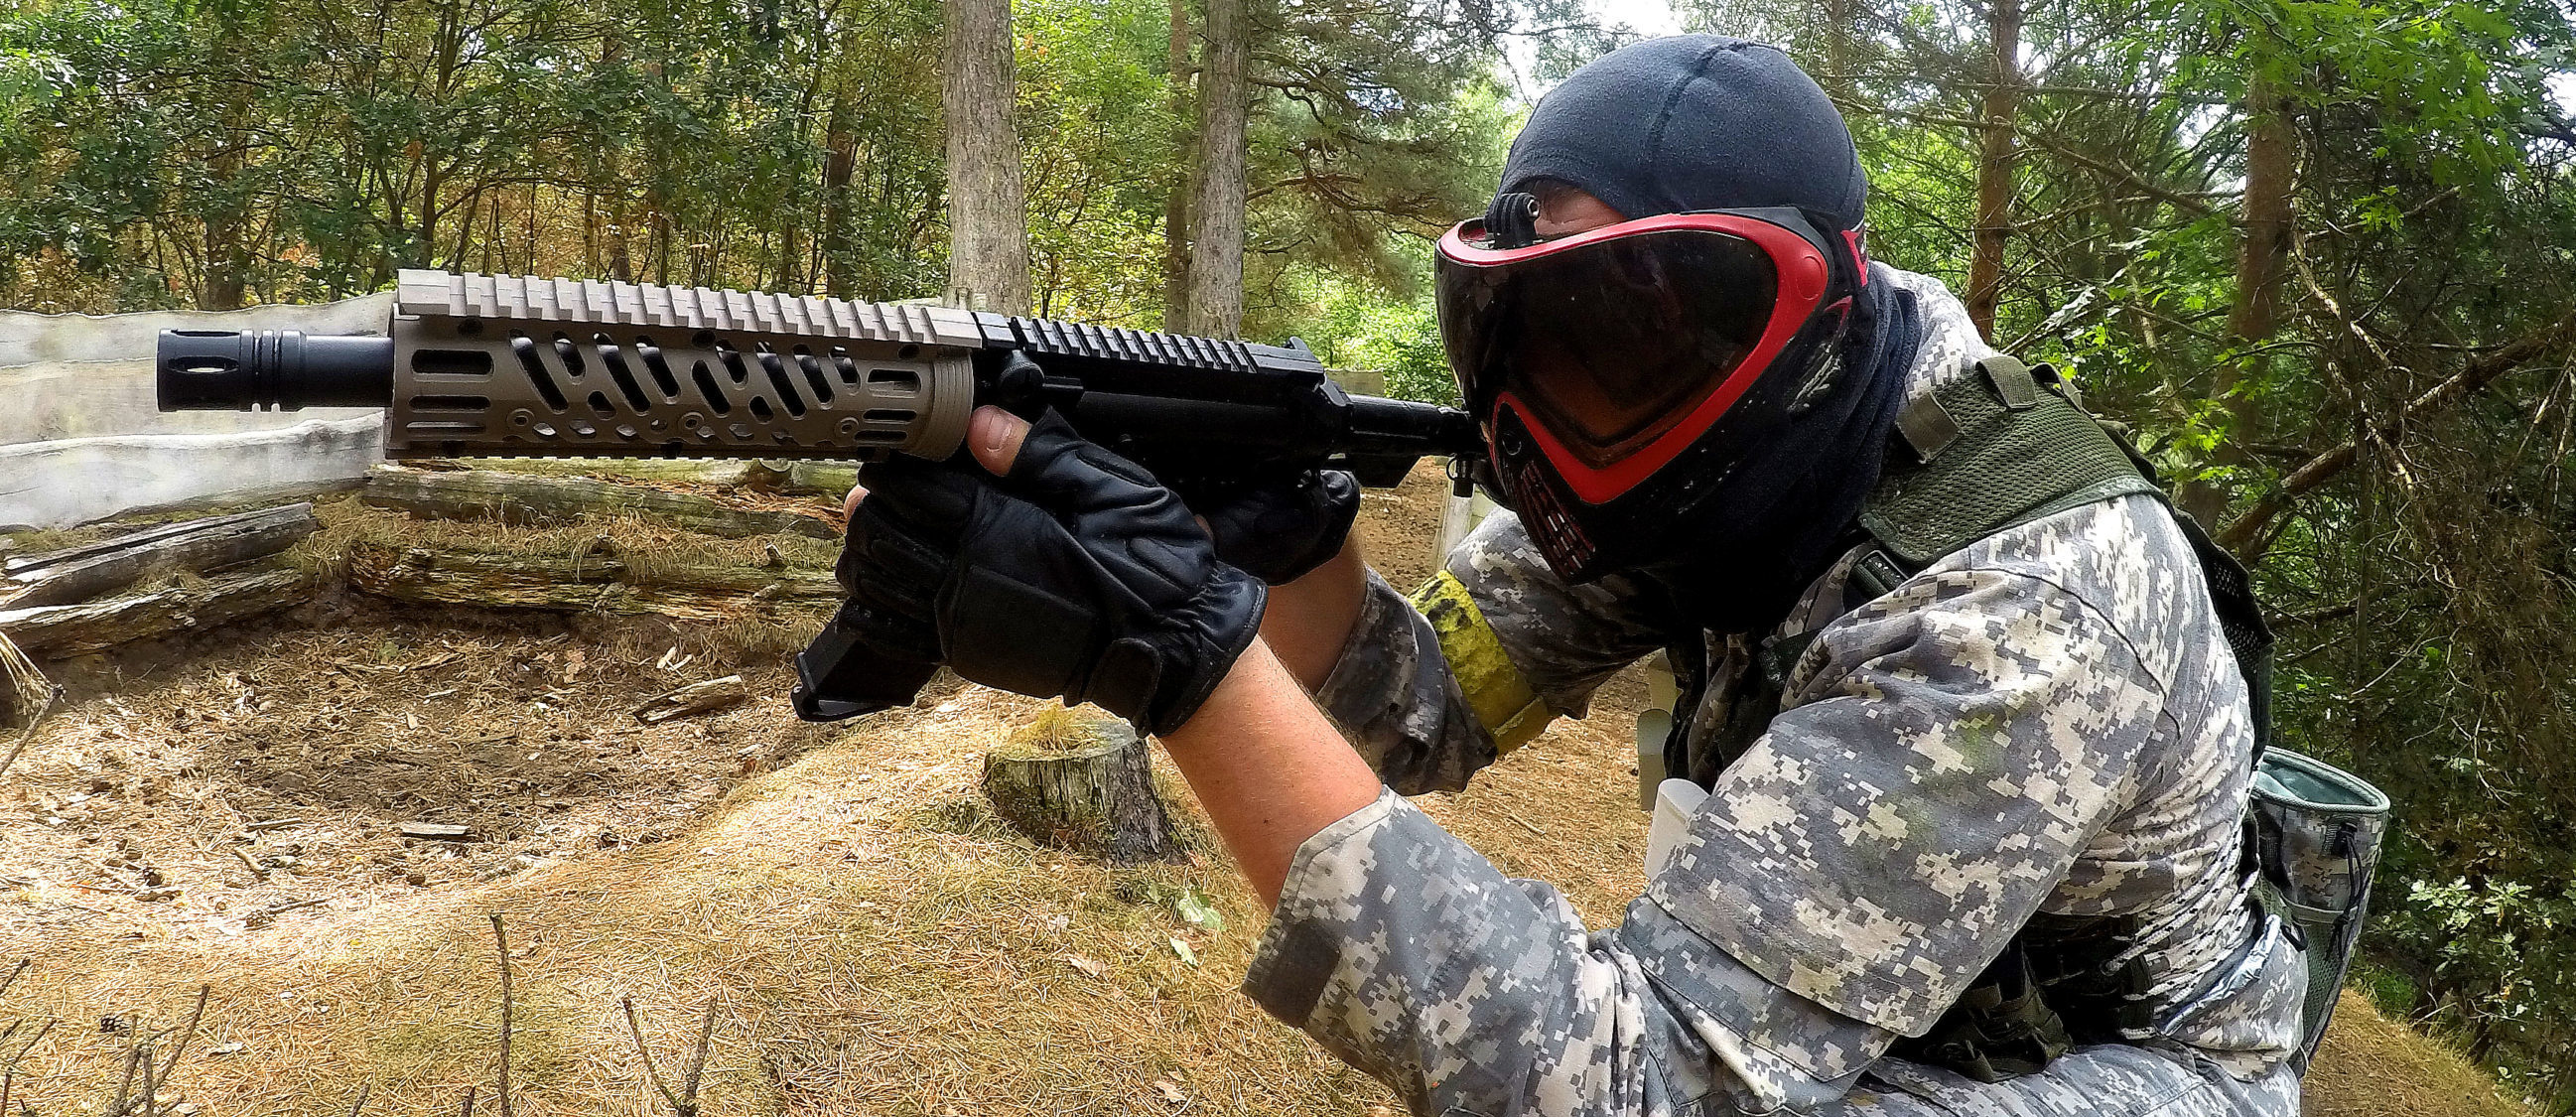 Paintball: An airsoft player equipped with an AR15 Close Quarters Battle rifle. 2600x1130 Dual Screen Background.